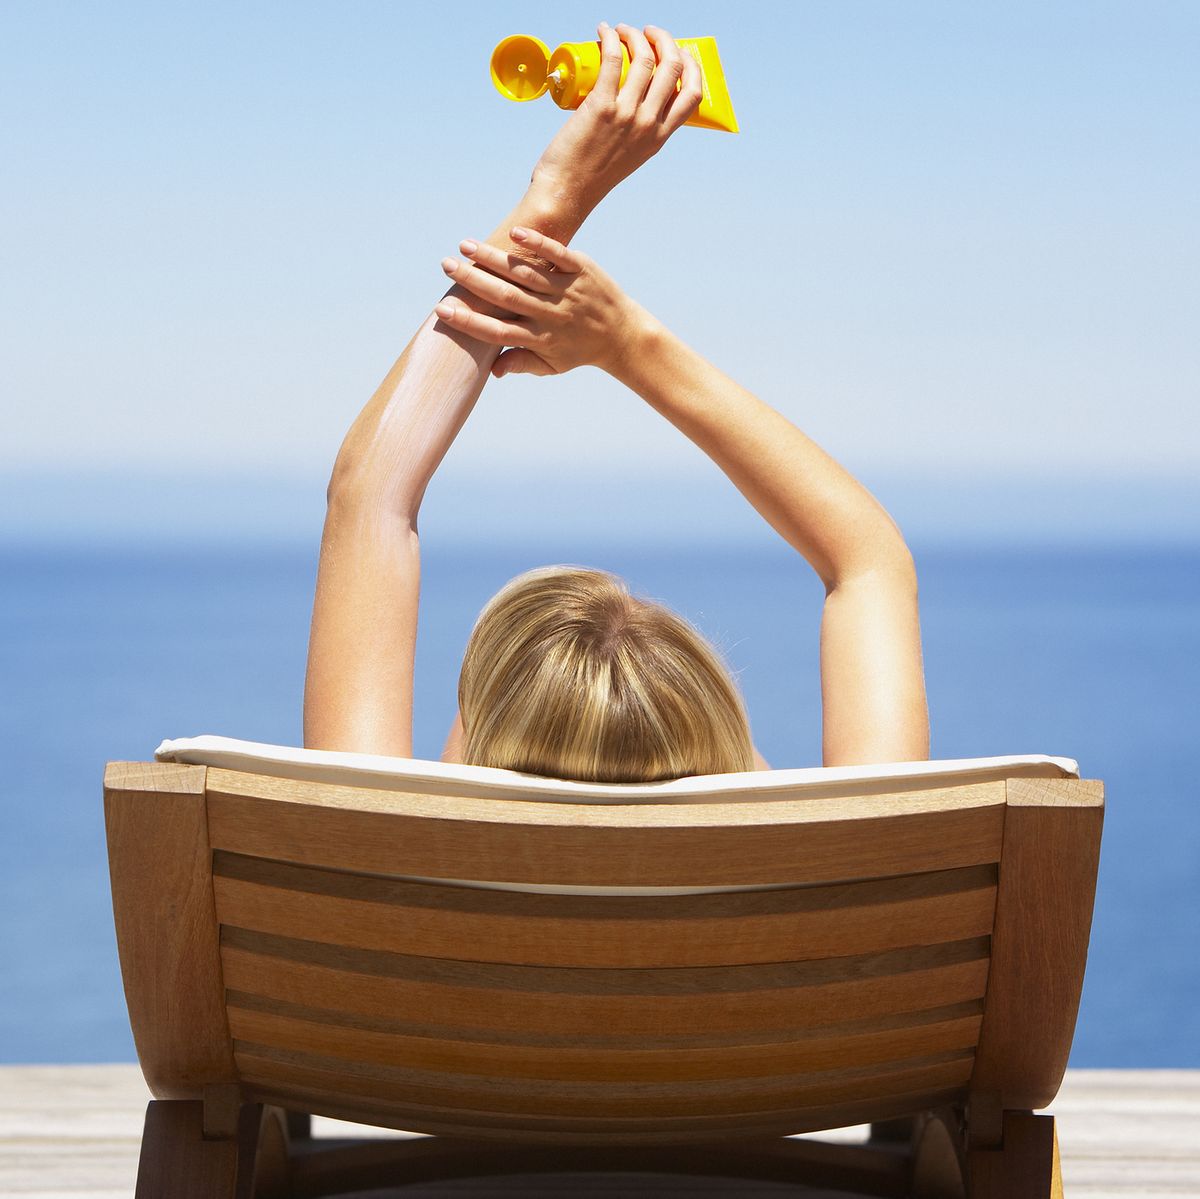 Is SPF 100 Really the Best and Safest Sunscreen? 